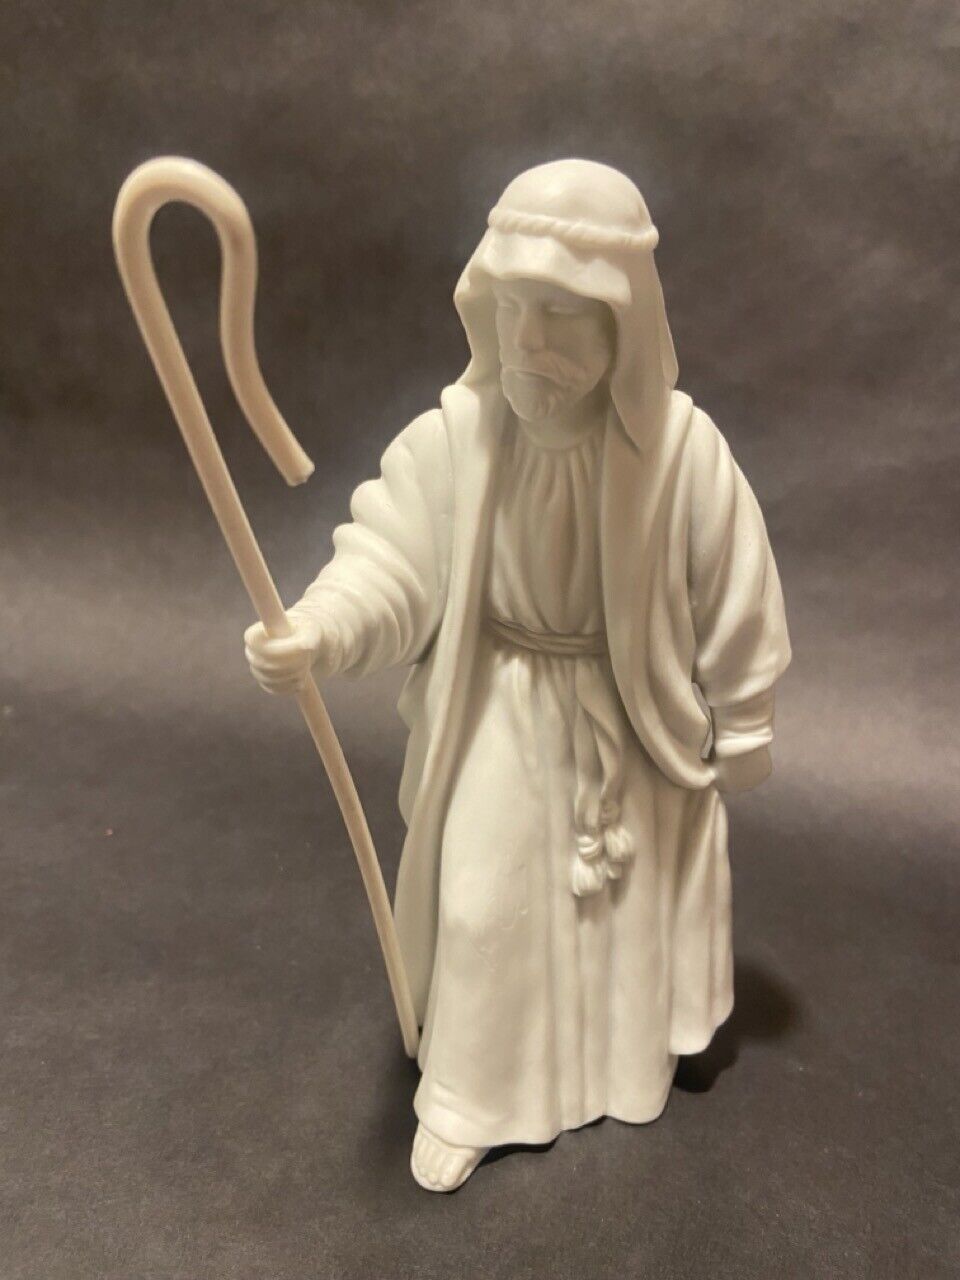 Avon Nativity Collectibles, White Porcelain Figurines: Individually Priced